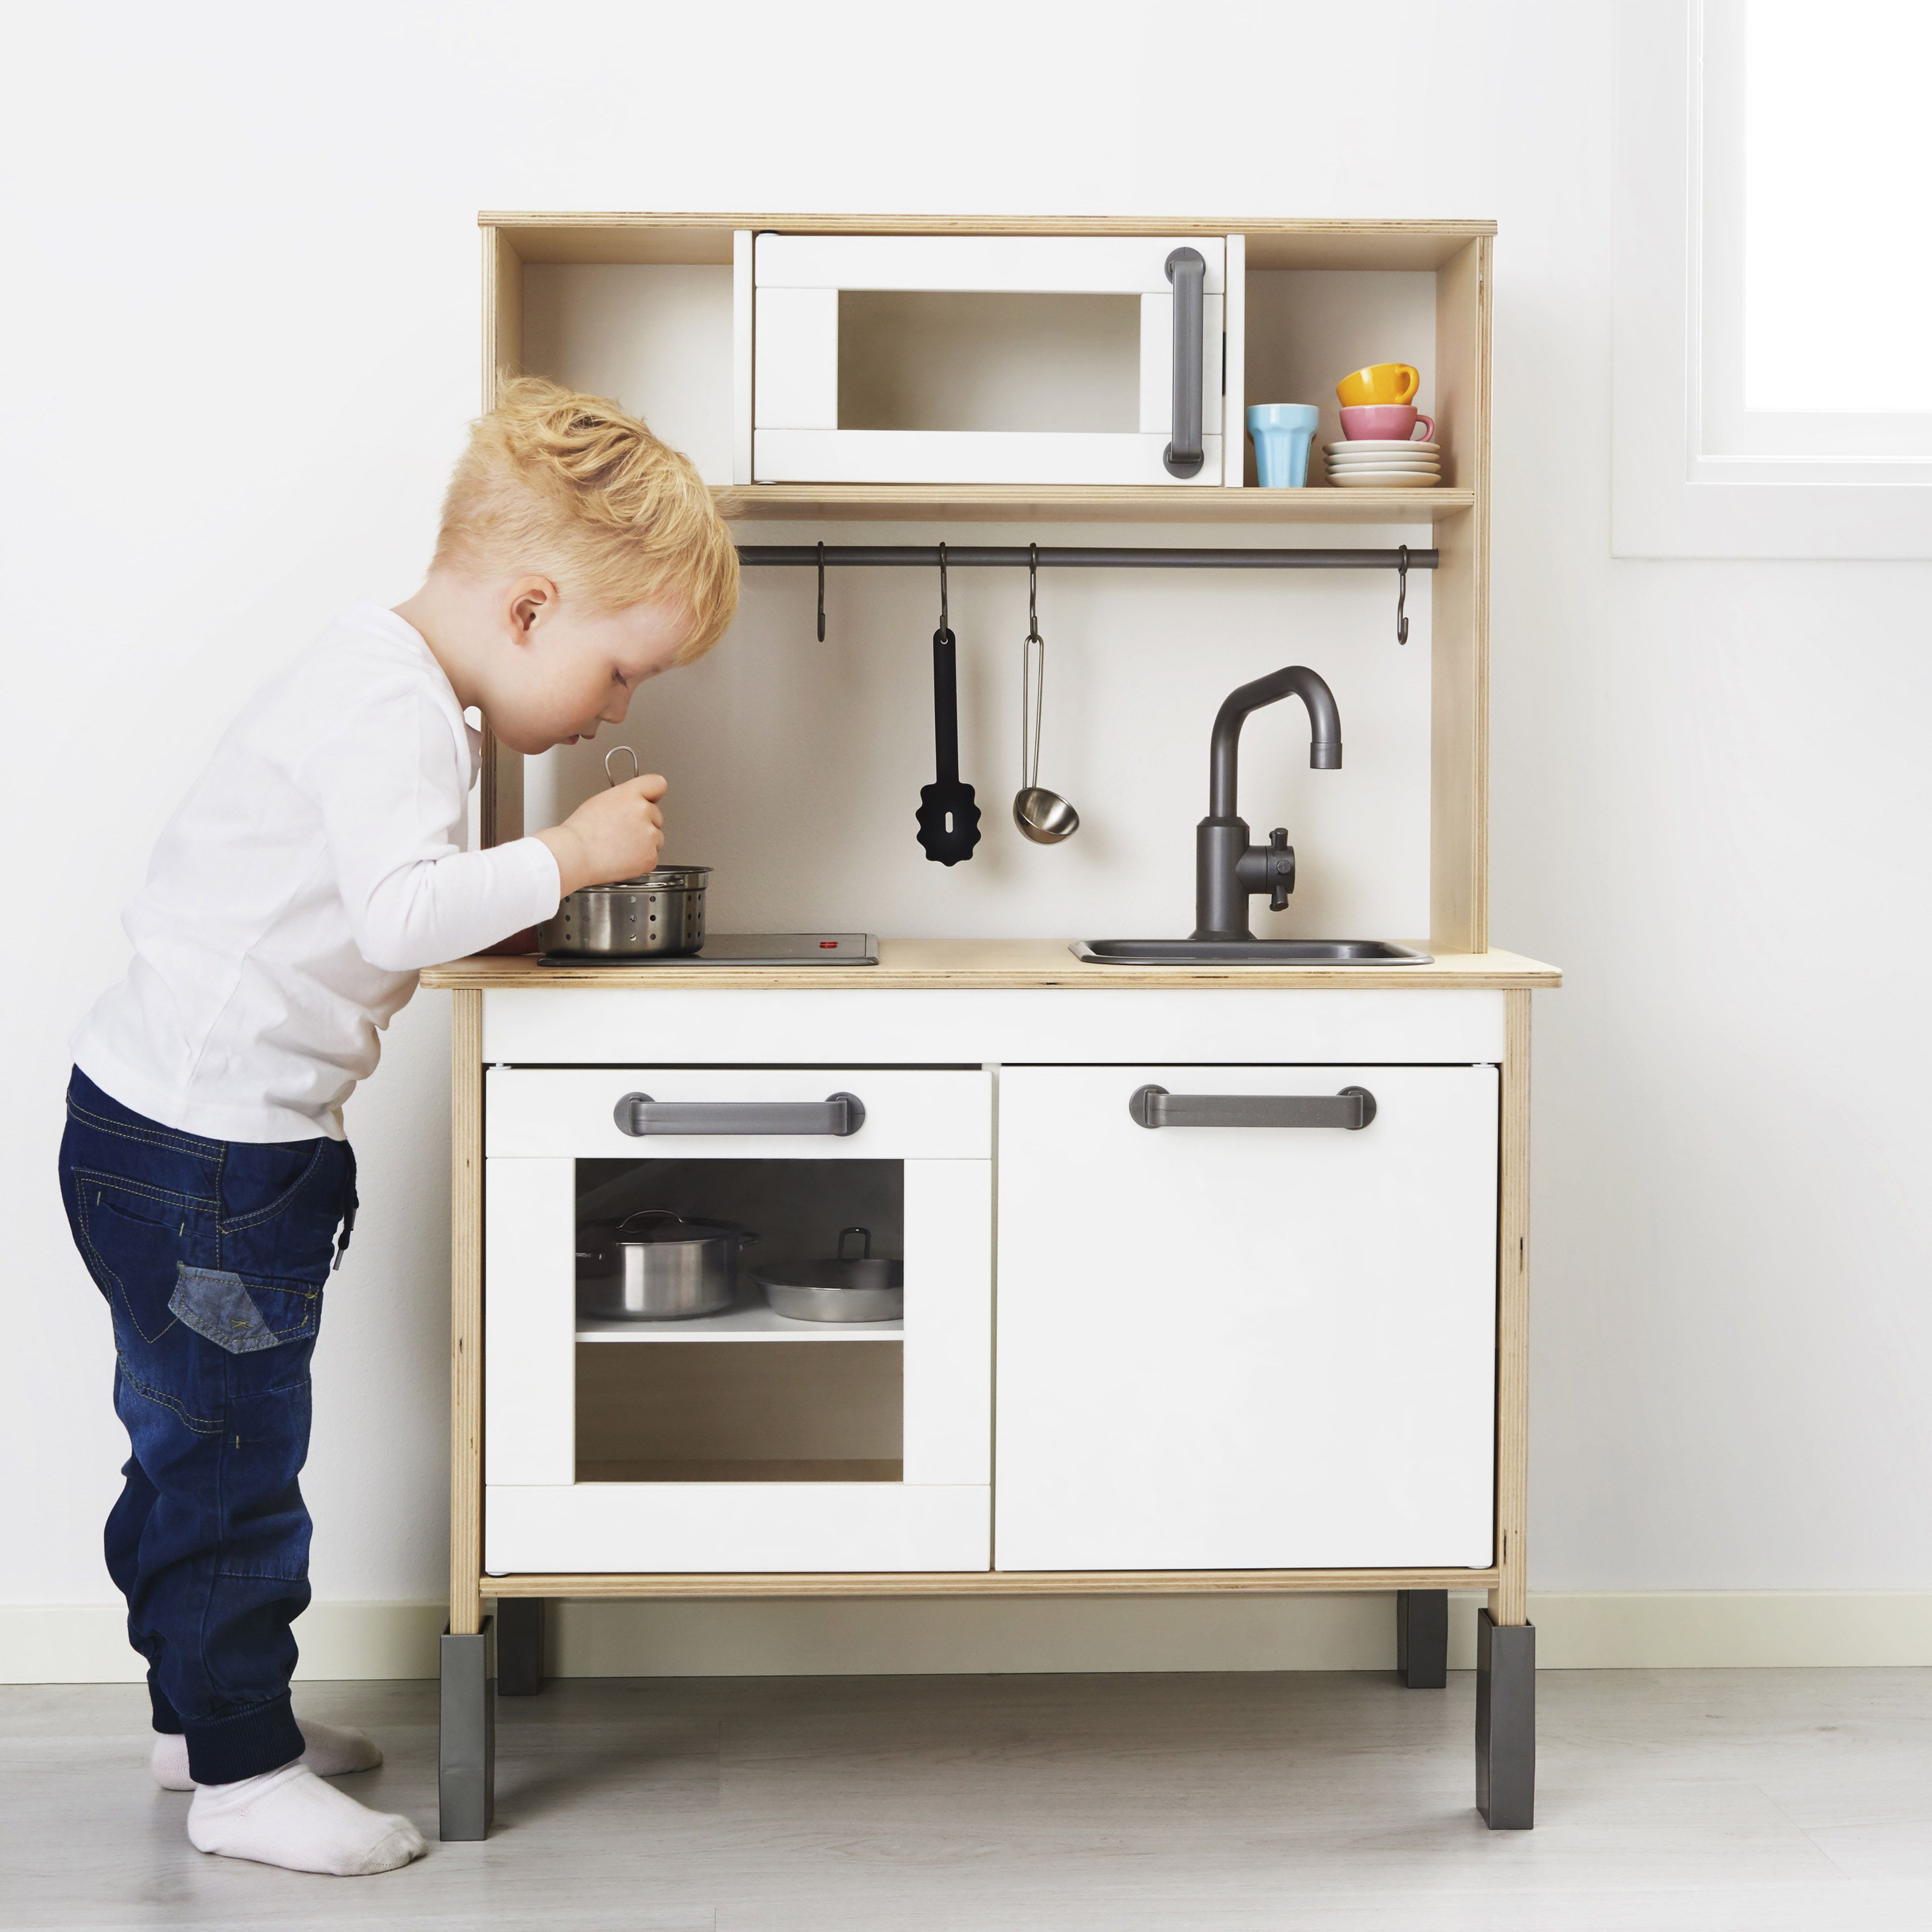 IKEA Wooden Play Kitchens – IKEA Play Kitchen For Sale